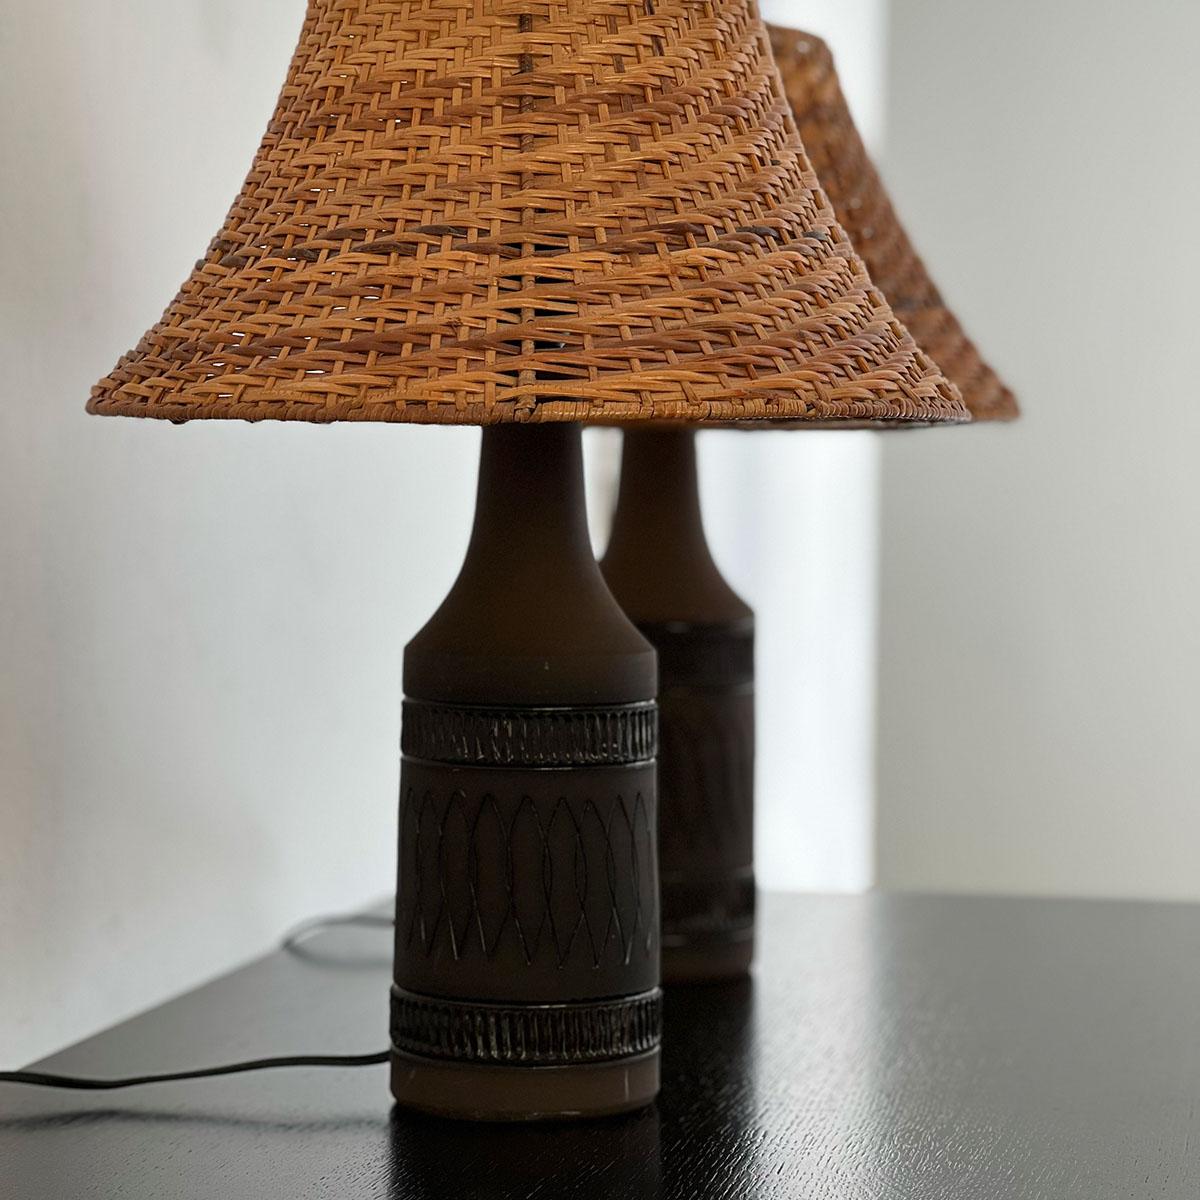 Pair of ceramic table lamps designed and manufactured by Nila in Sweden, 1960s.

An outstanding pair of table lamps designed and manufactured by Nila in the 1960s. Each of these table lamps features a dark brown-colored ceramic body with a